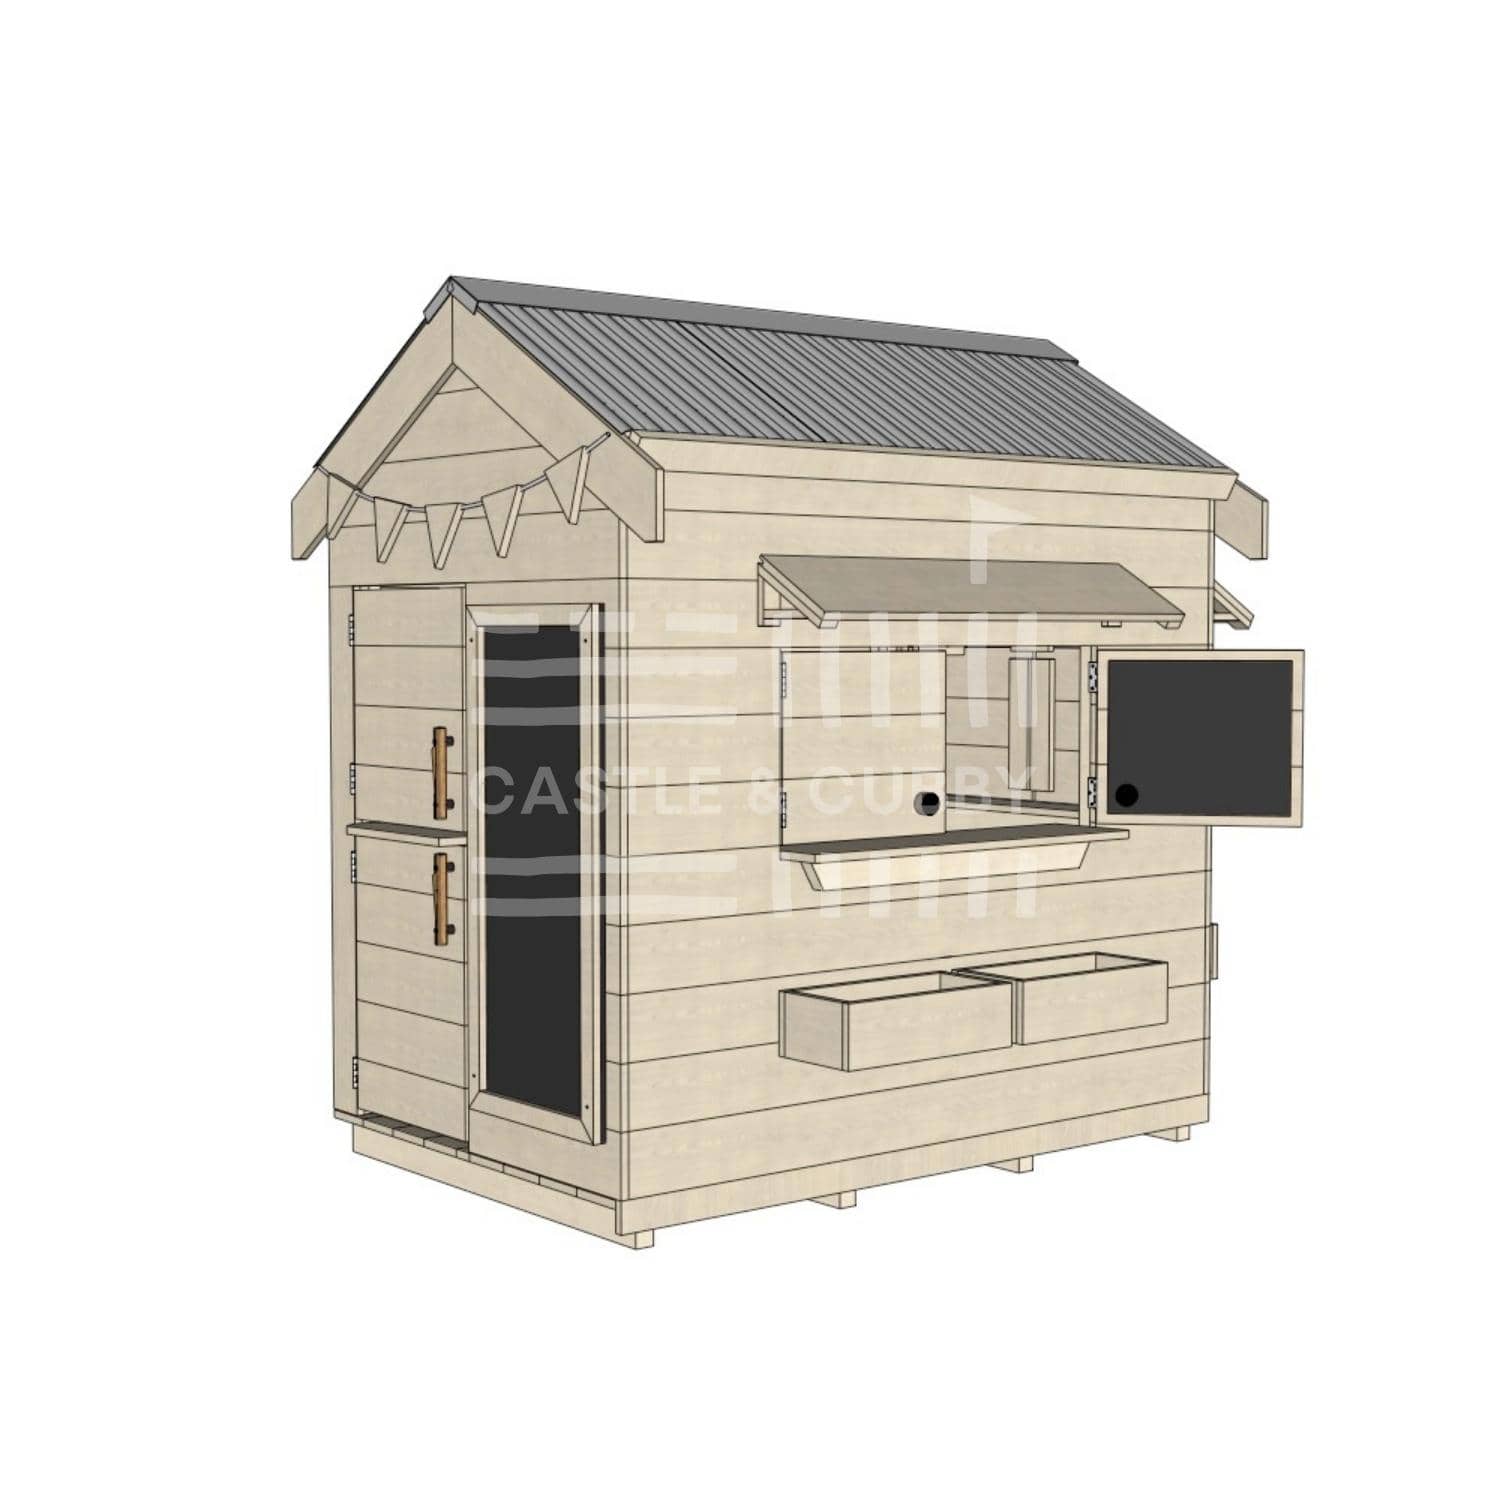 Pitched roof raw wooden cubby house residential and family homes little rectangle accessories